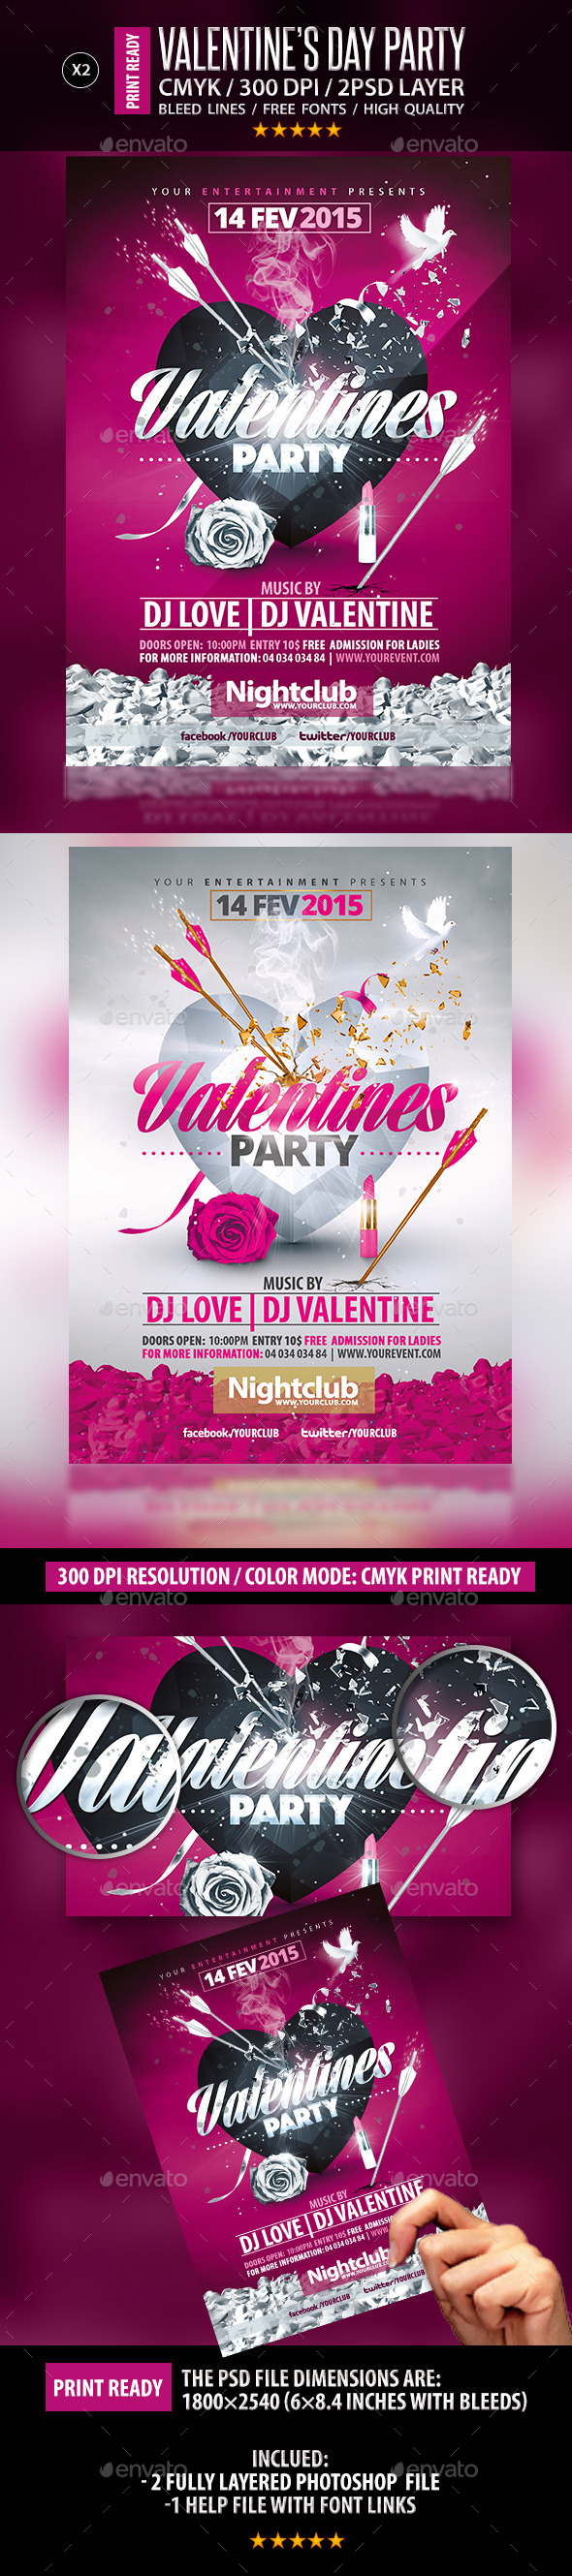 Valentines Party Flyer Collection